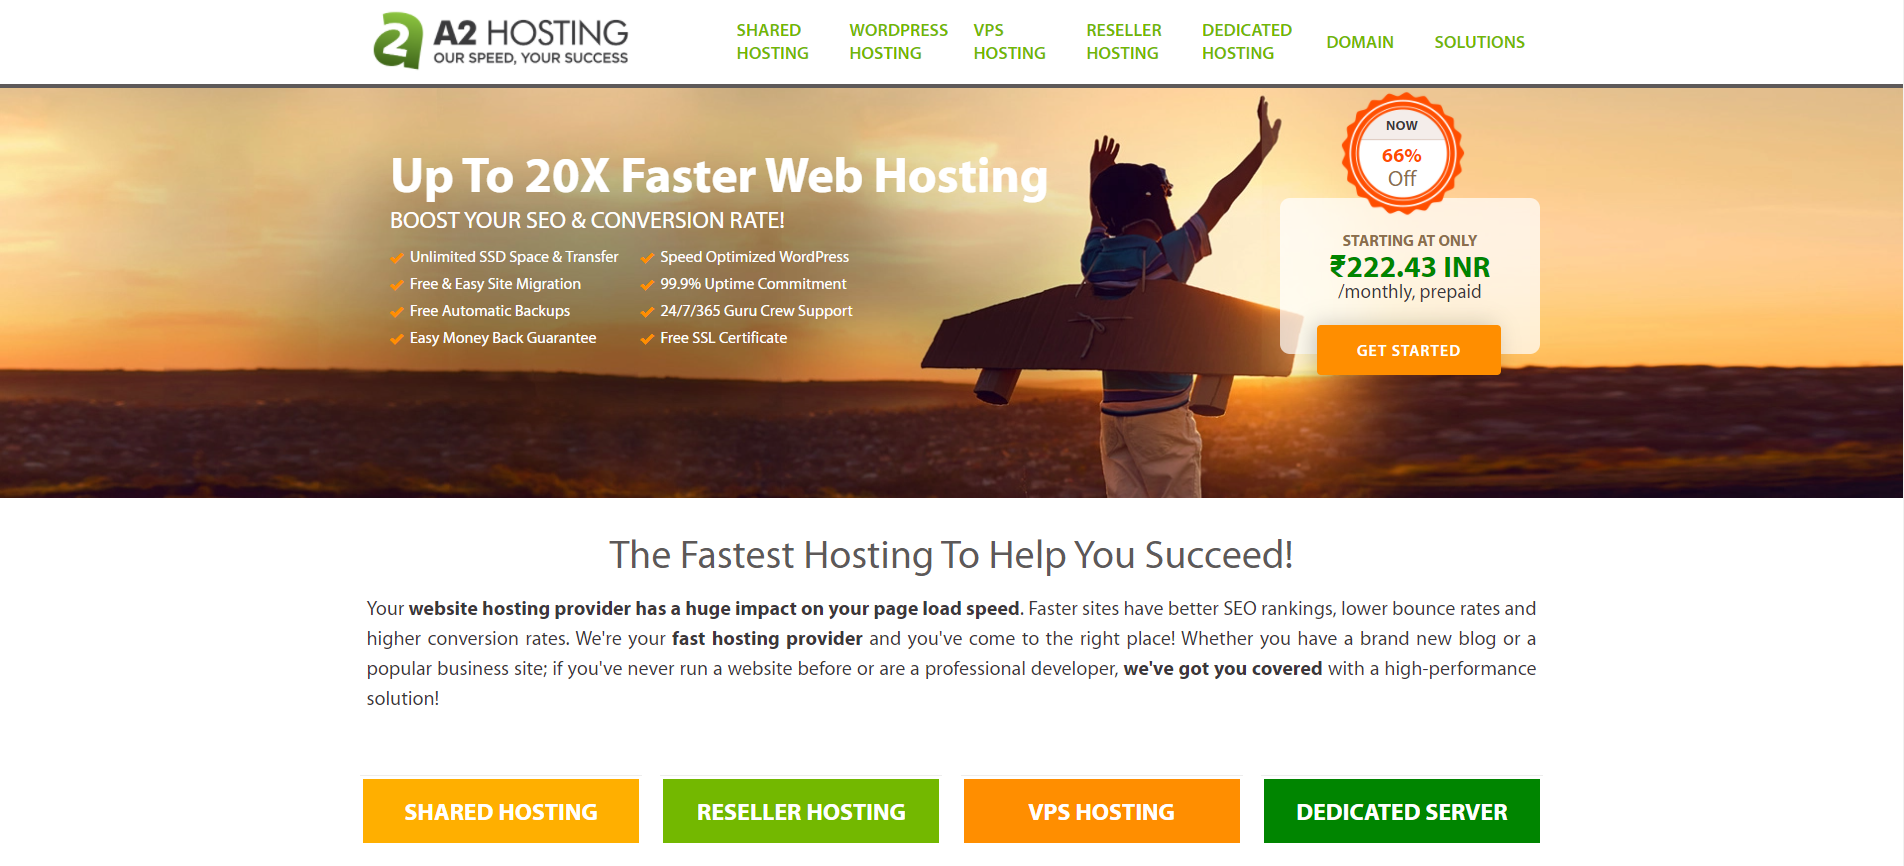 A2 Hosting vs SiteGround Hosting Compared in 2021